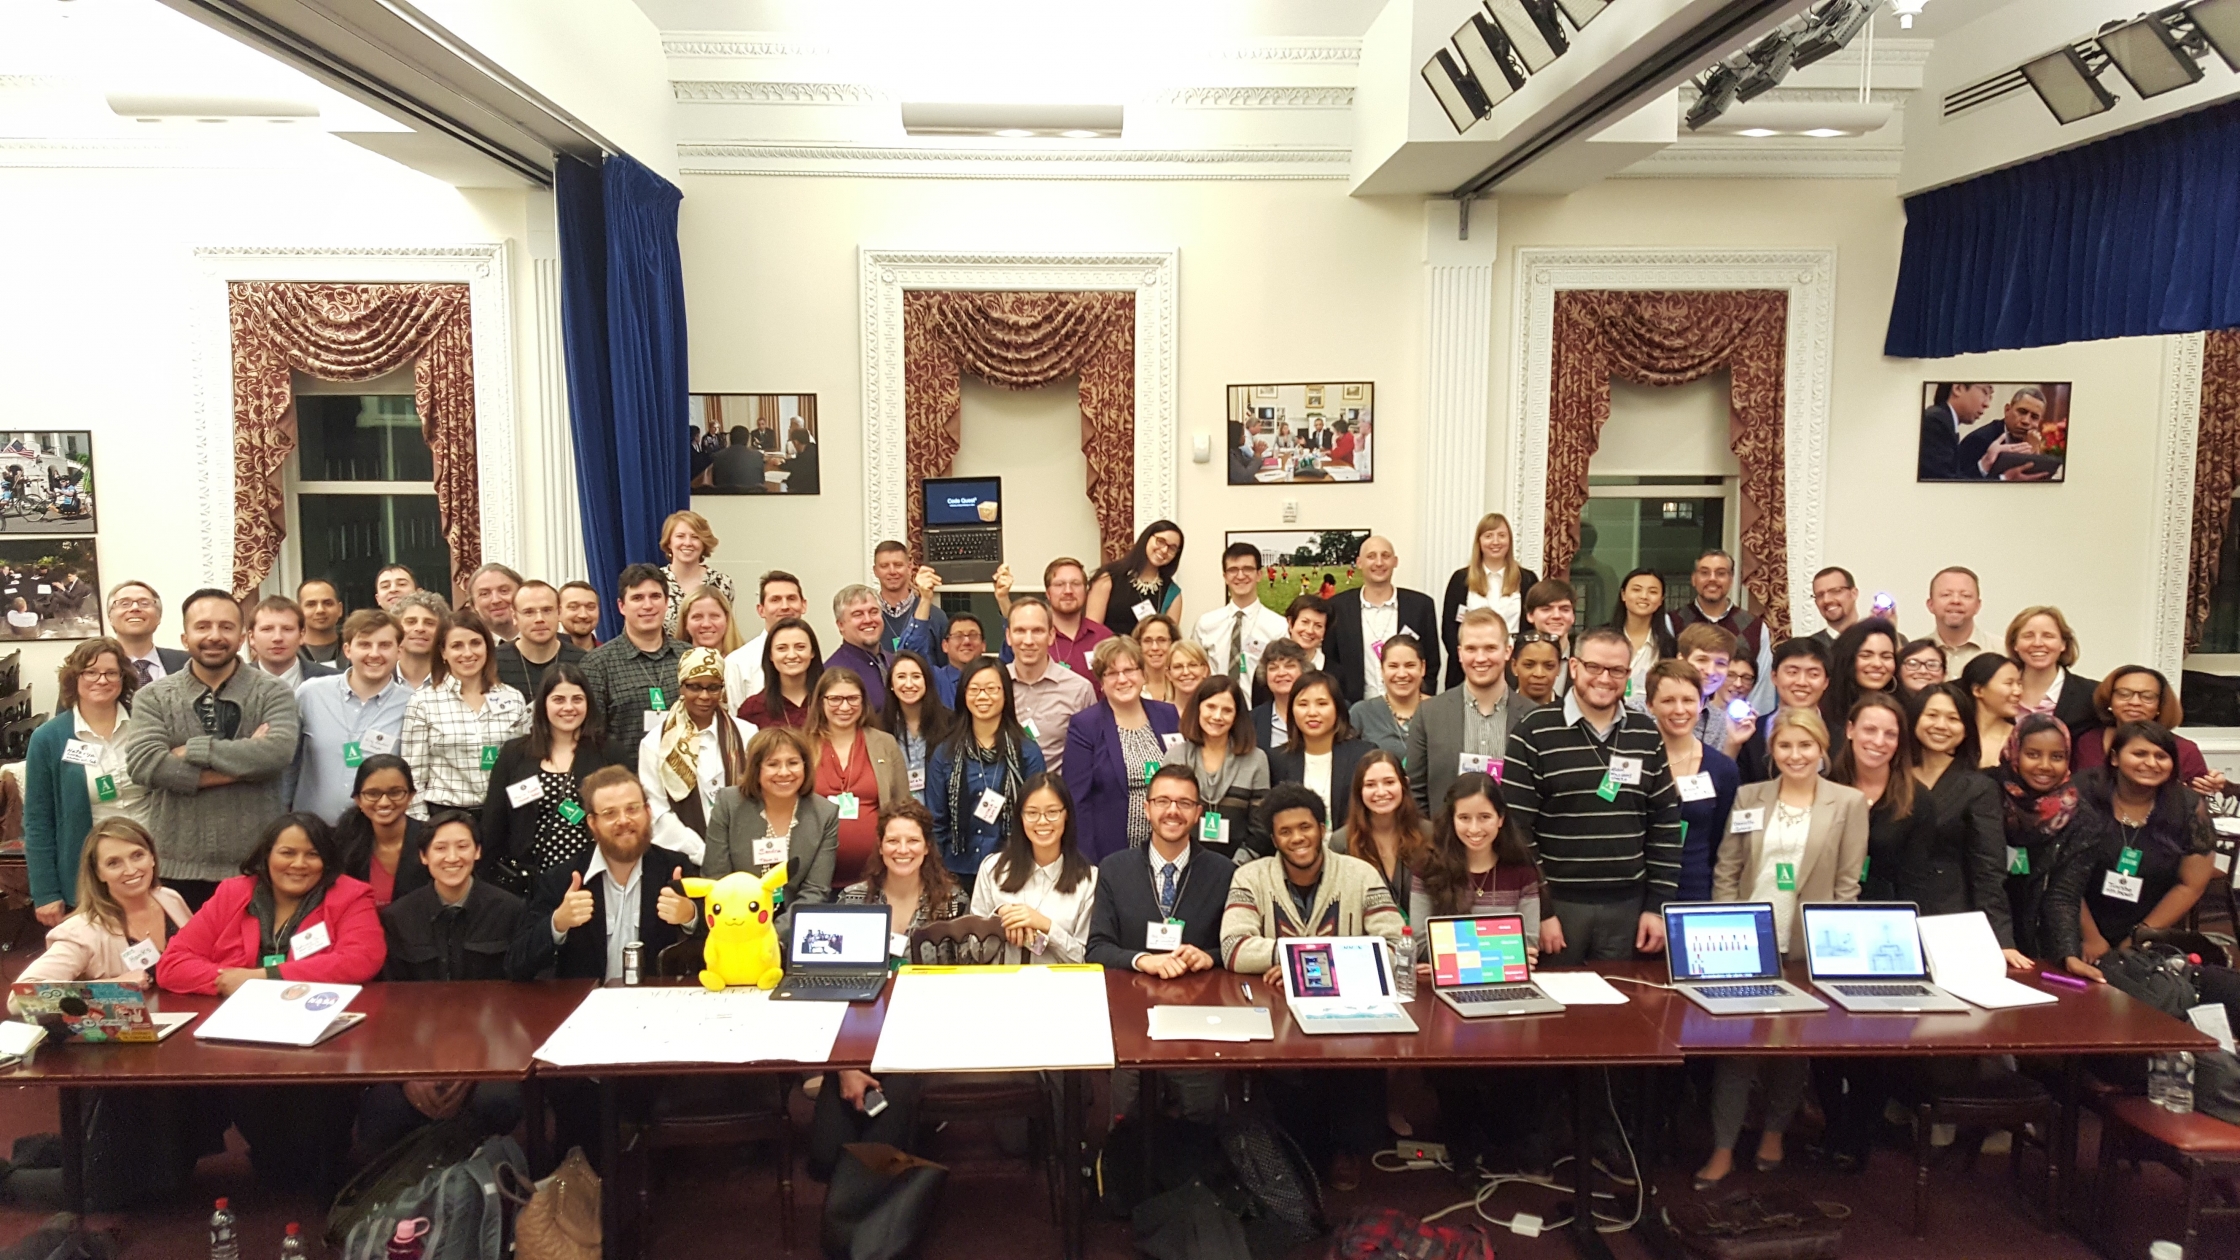 Educators, students, and developers generate new ideas for bringing computer science education to elementary school classrooms at first-ever White House Computer Science Tech Jam, December 7, 2015.